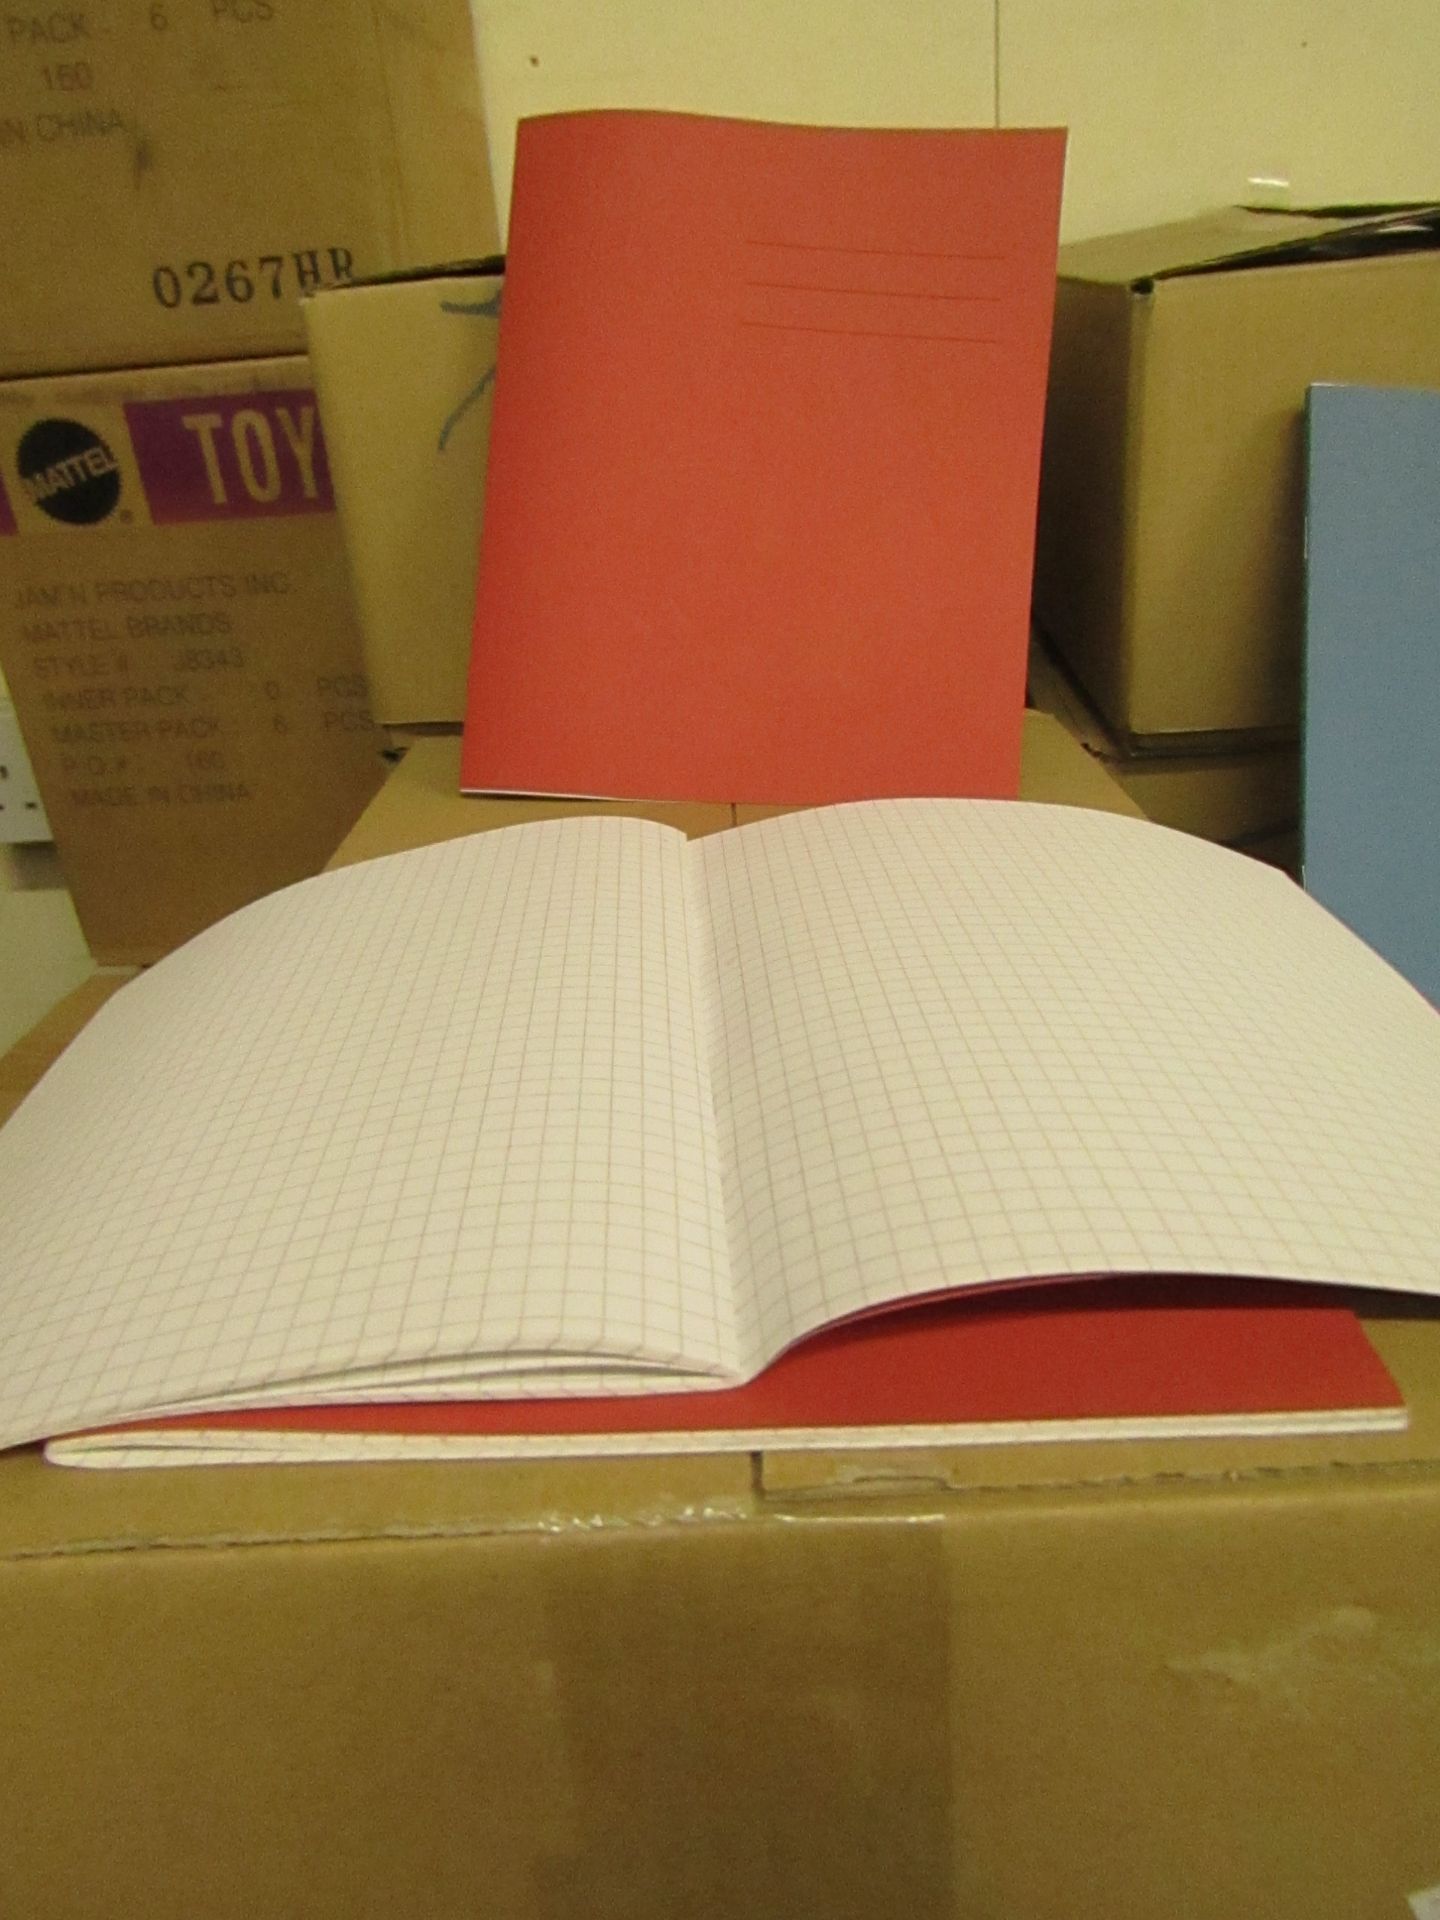 Box of 100 Red work books - all new and boxed.